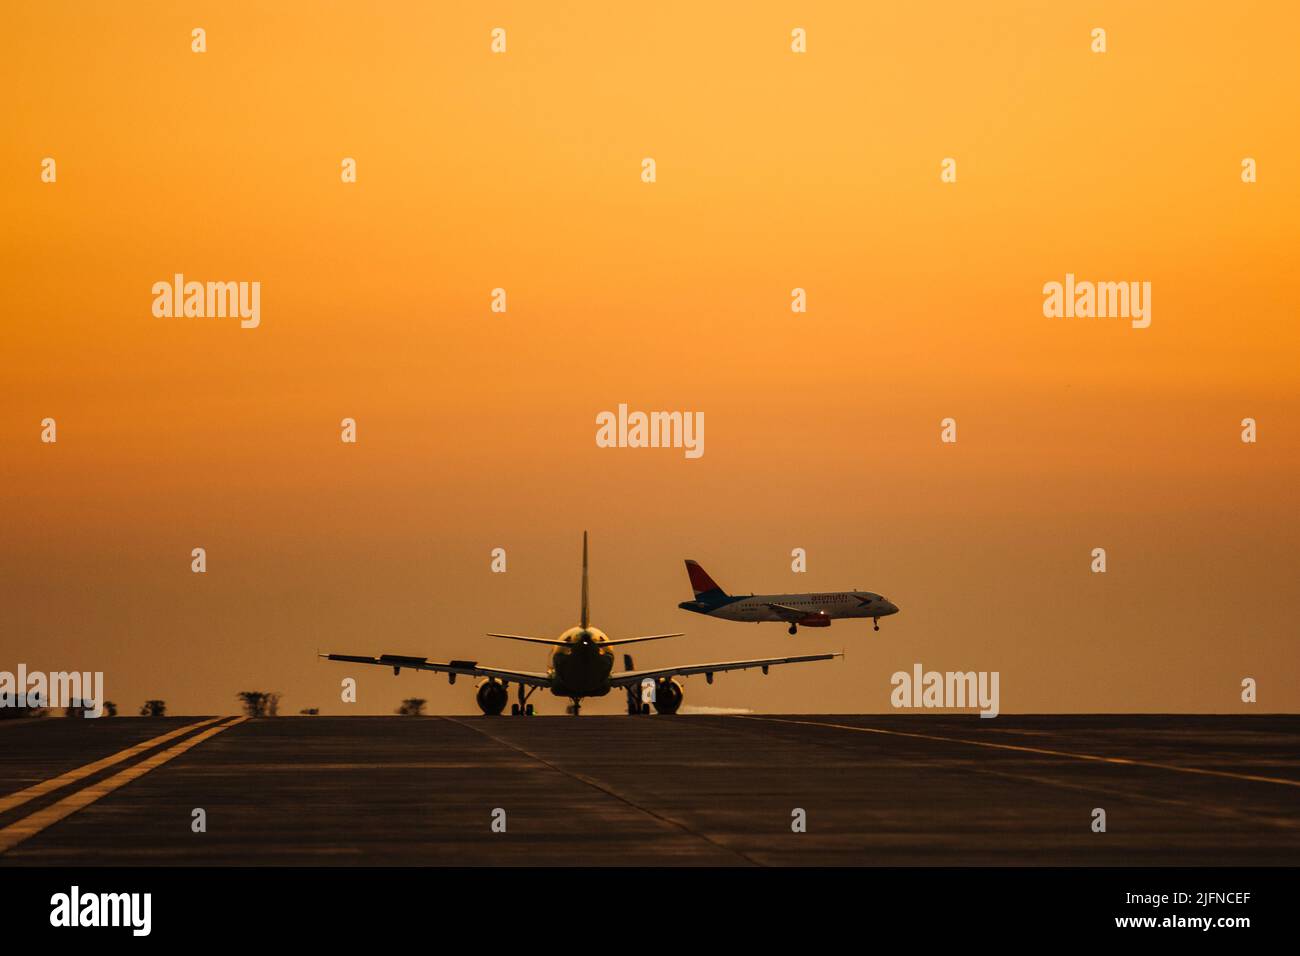 Passenger airplane take off from airport runway against the backdrop of a picturesque evening sky with sun rays. Stock Photo